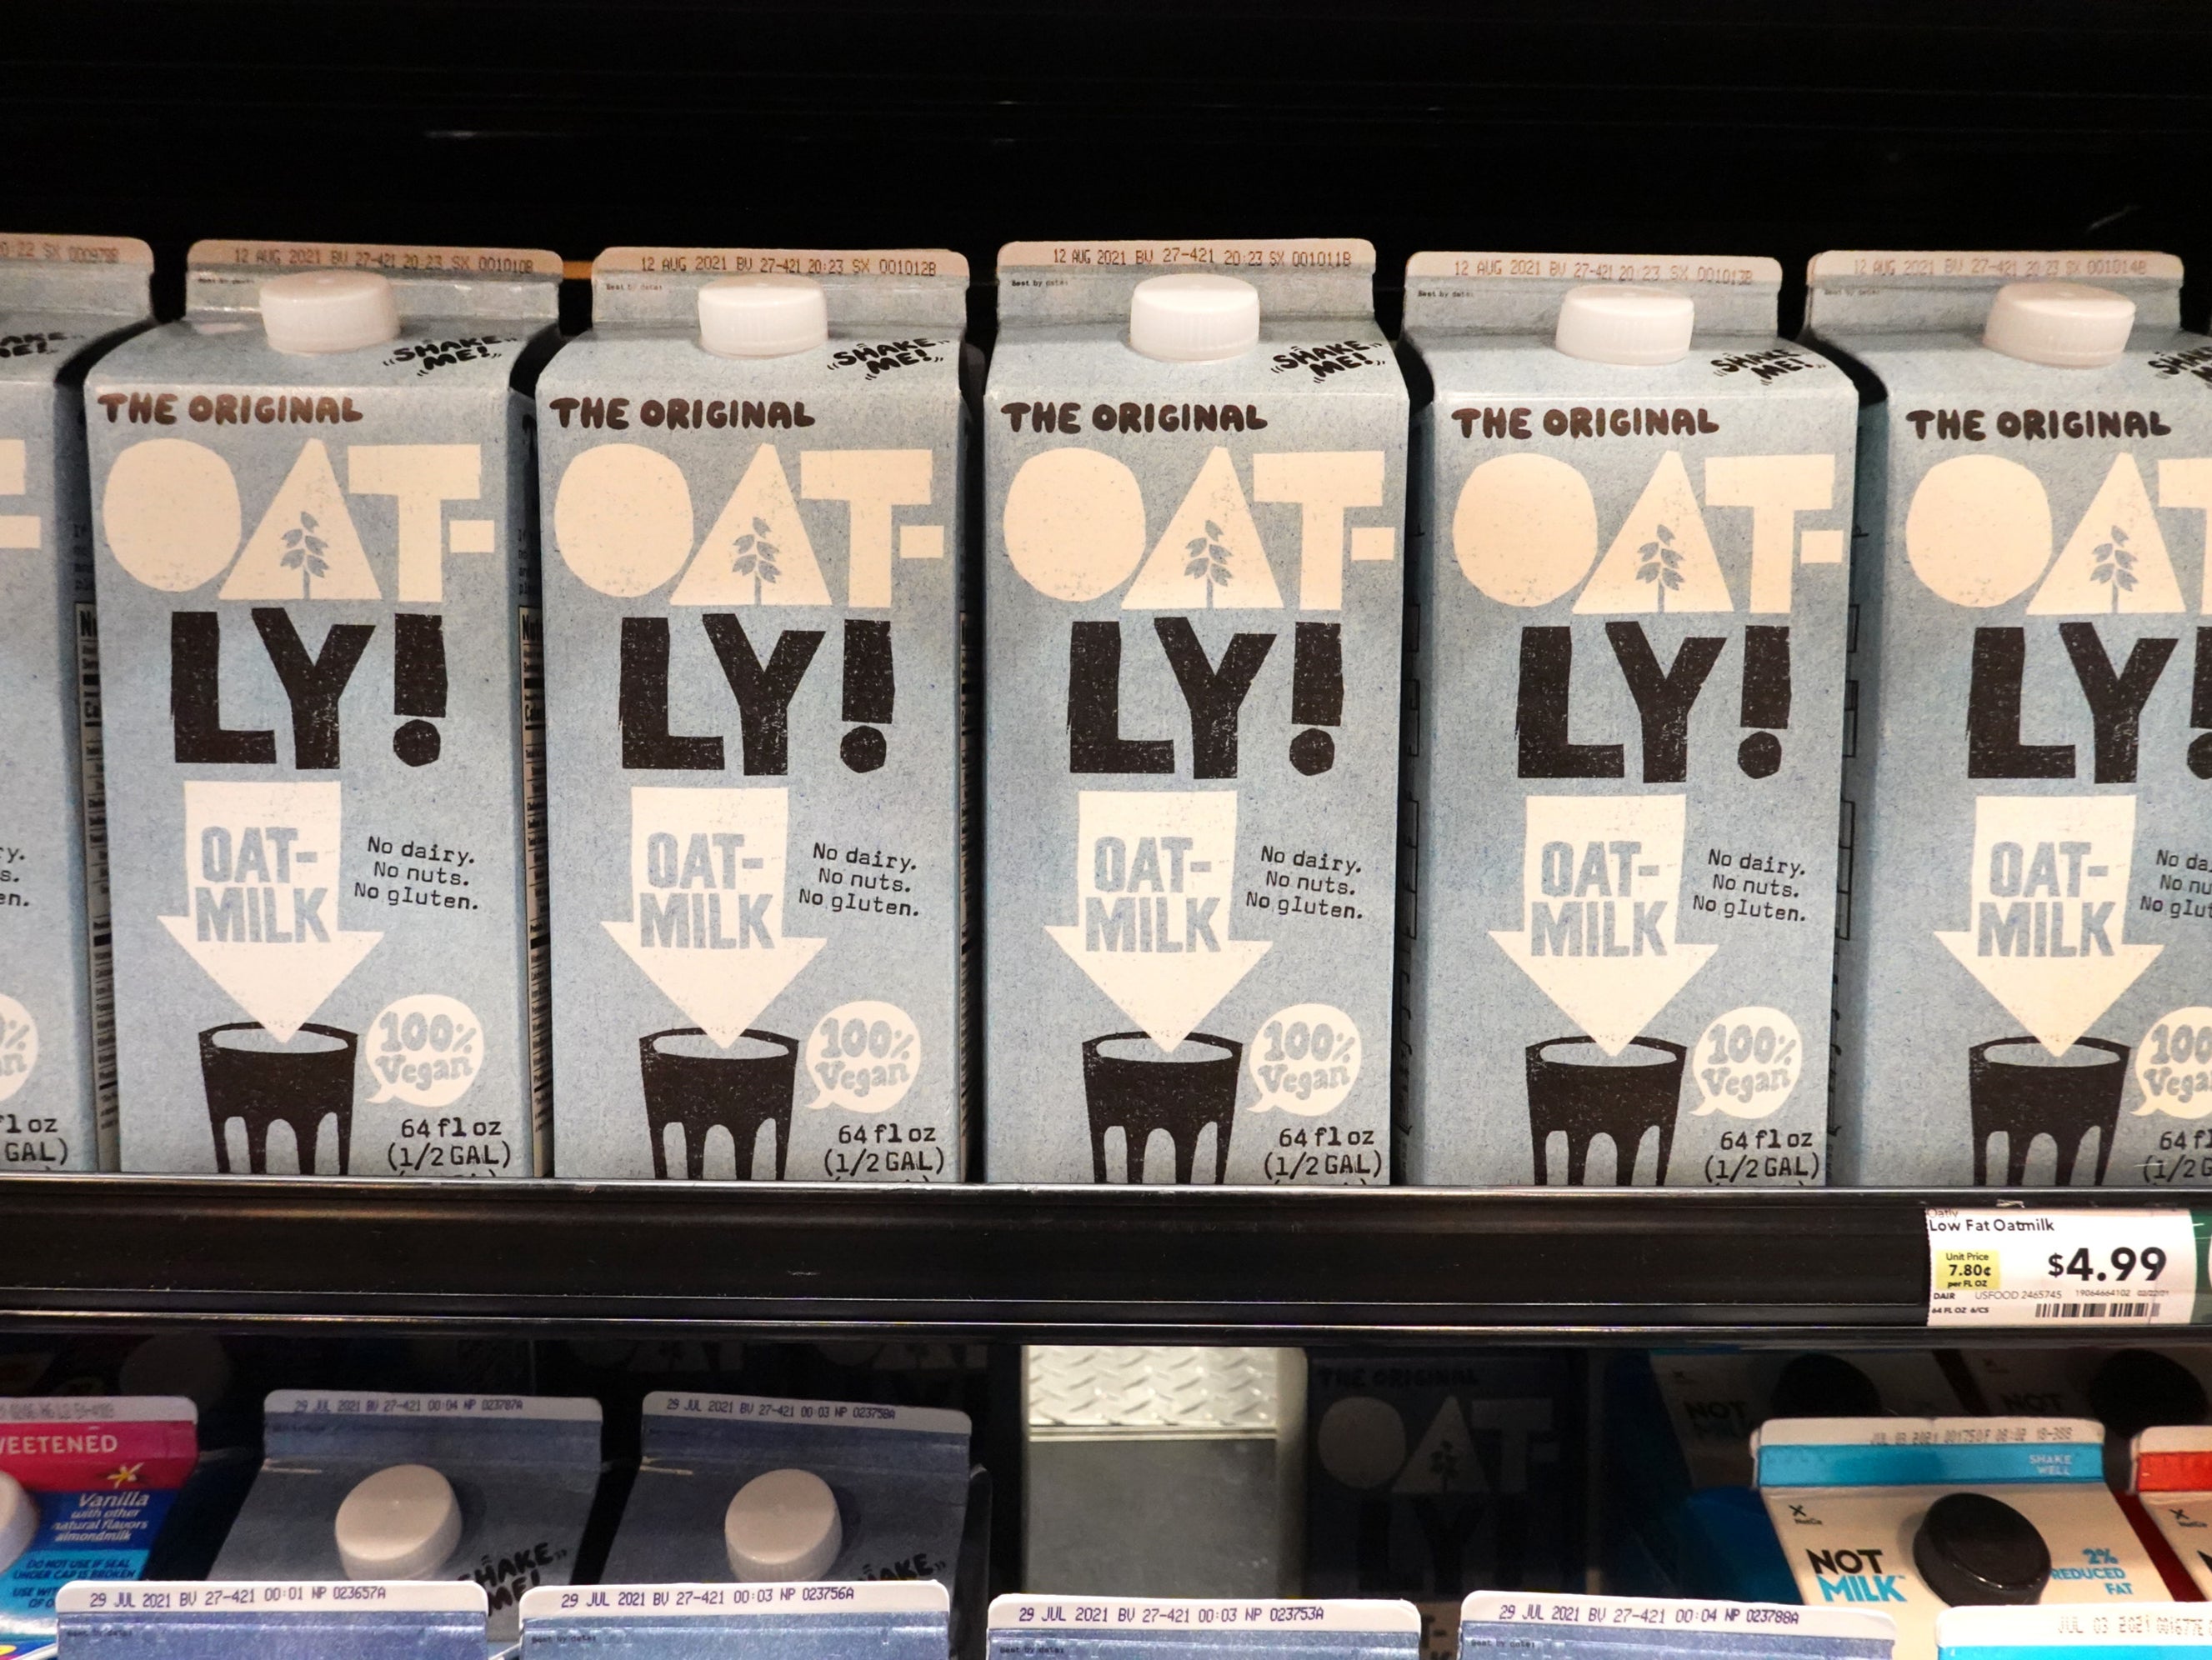 Oatly Offers Free Ad Space to Dairy Companies